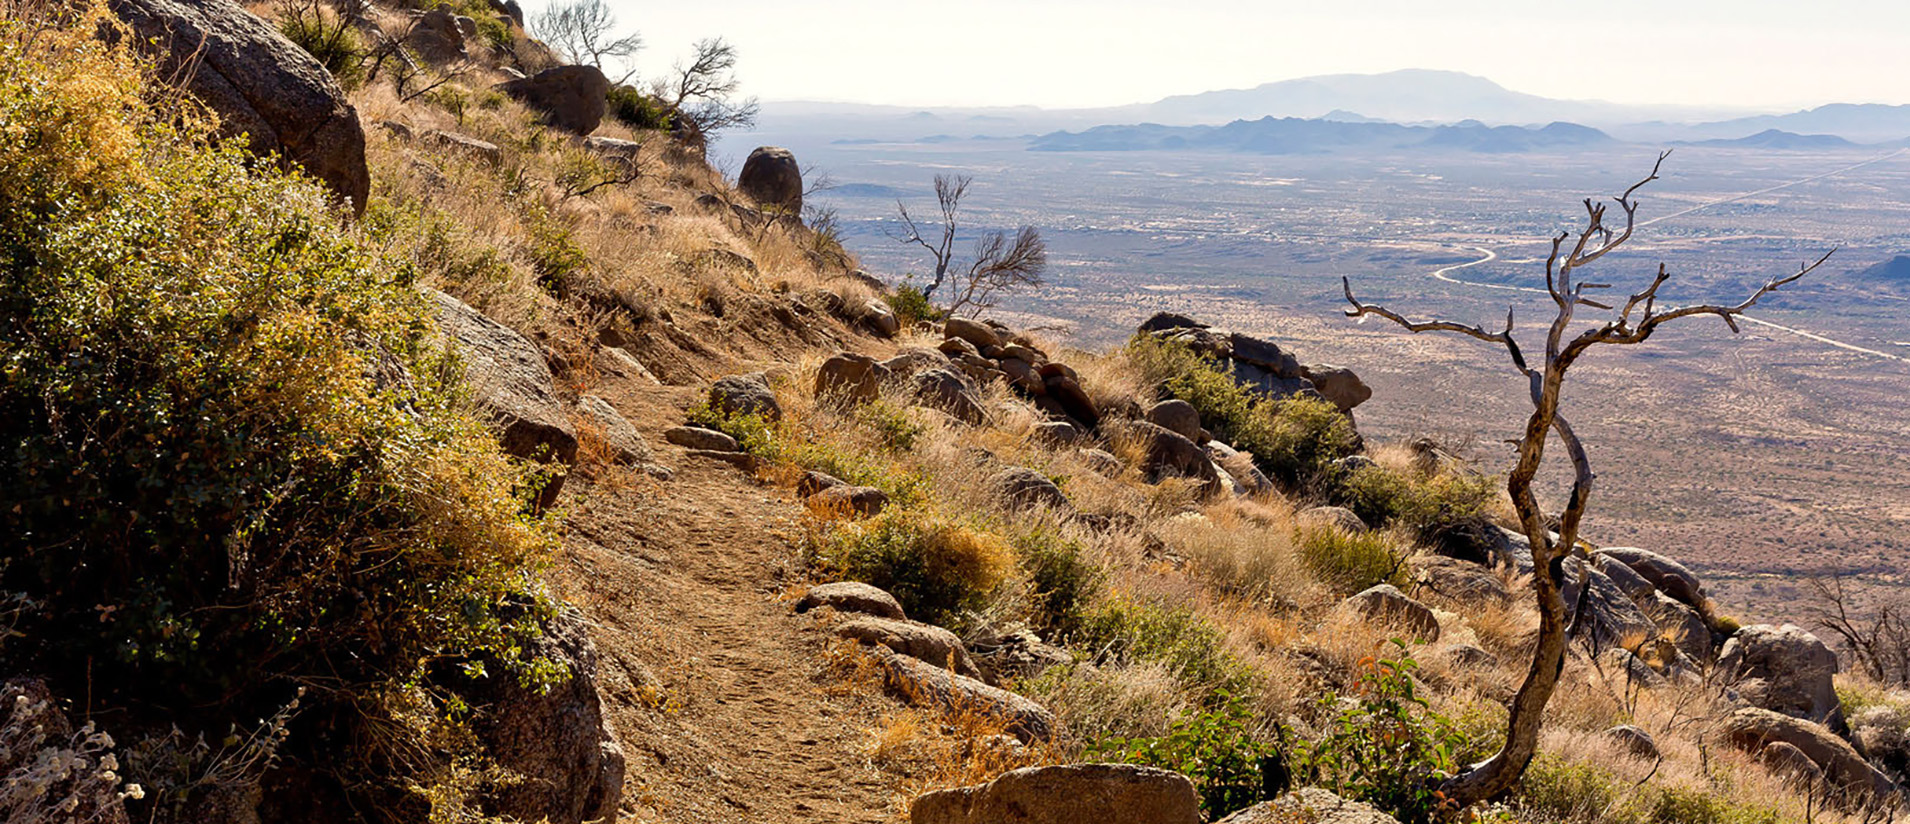 A view from the trail at Granite Mountain Hotshots Memorial State Park